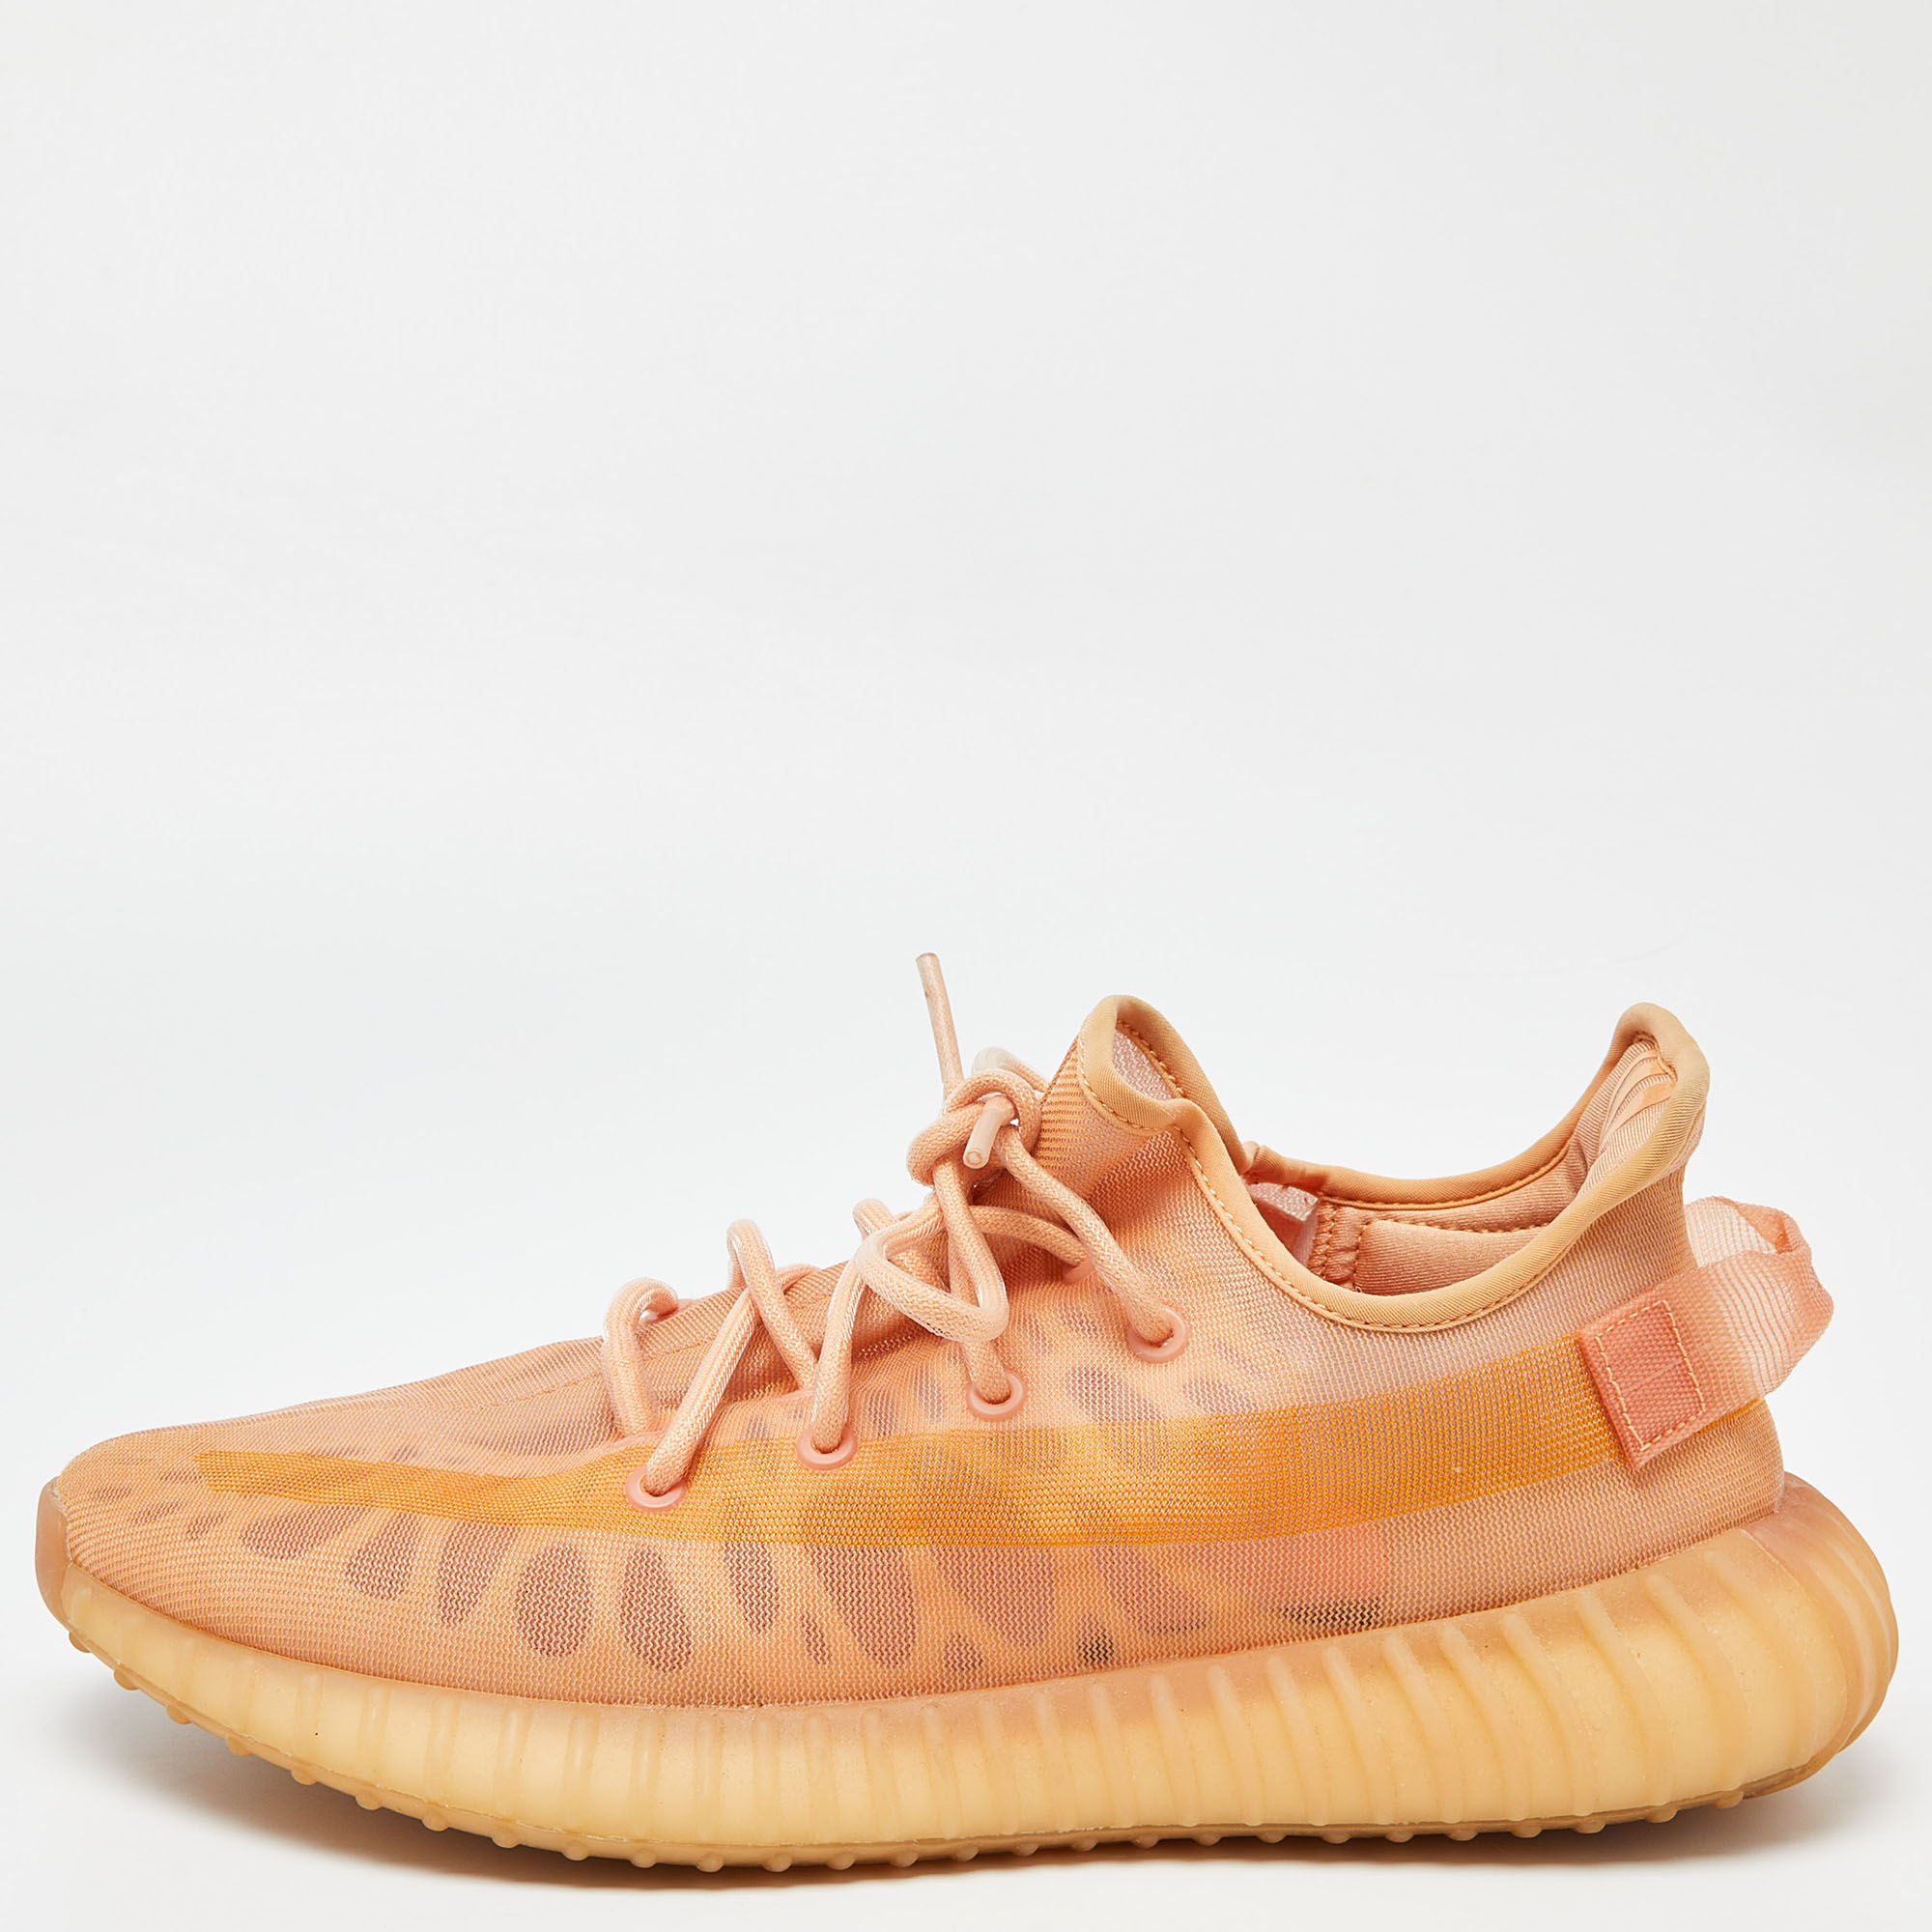 Pre-owned Yeezy X Adidas Orange Mesh Boost 350 V2 Mono Clay Sneakers Size 46